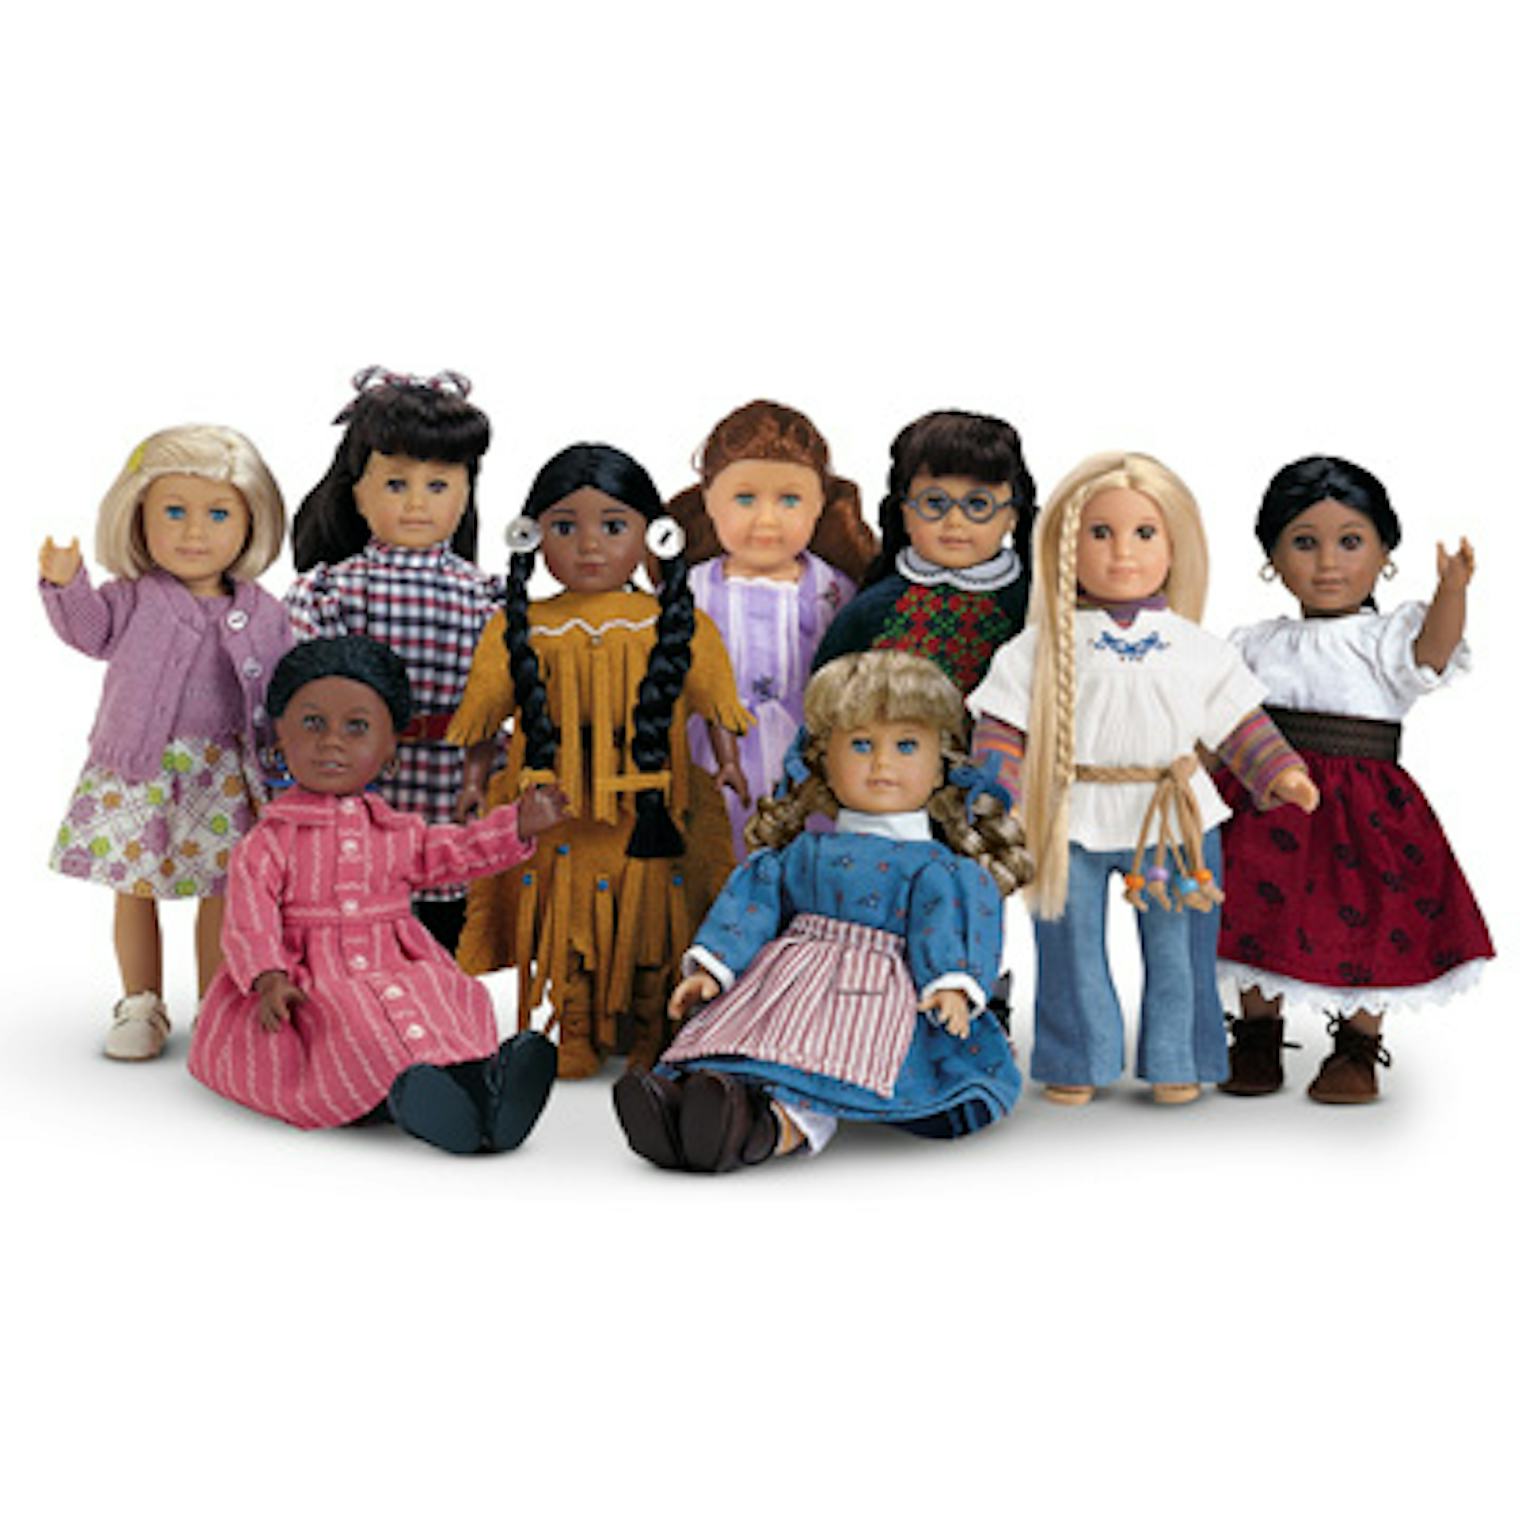 15 Things From The American Girl Catalog You Always Wanted In The '90s ...